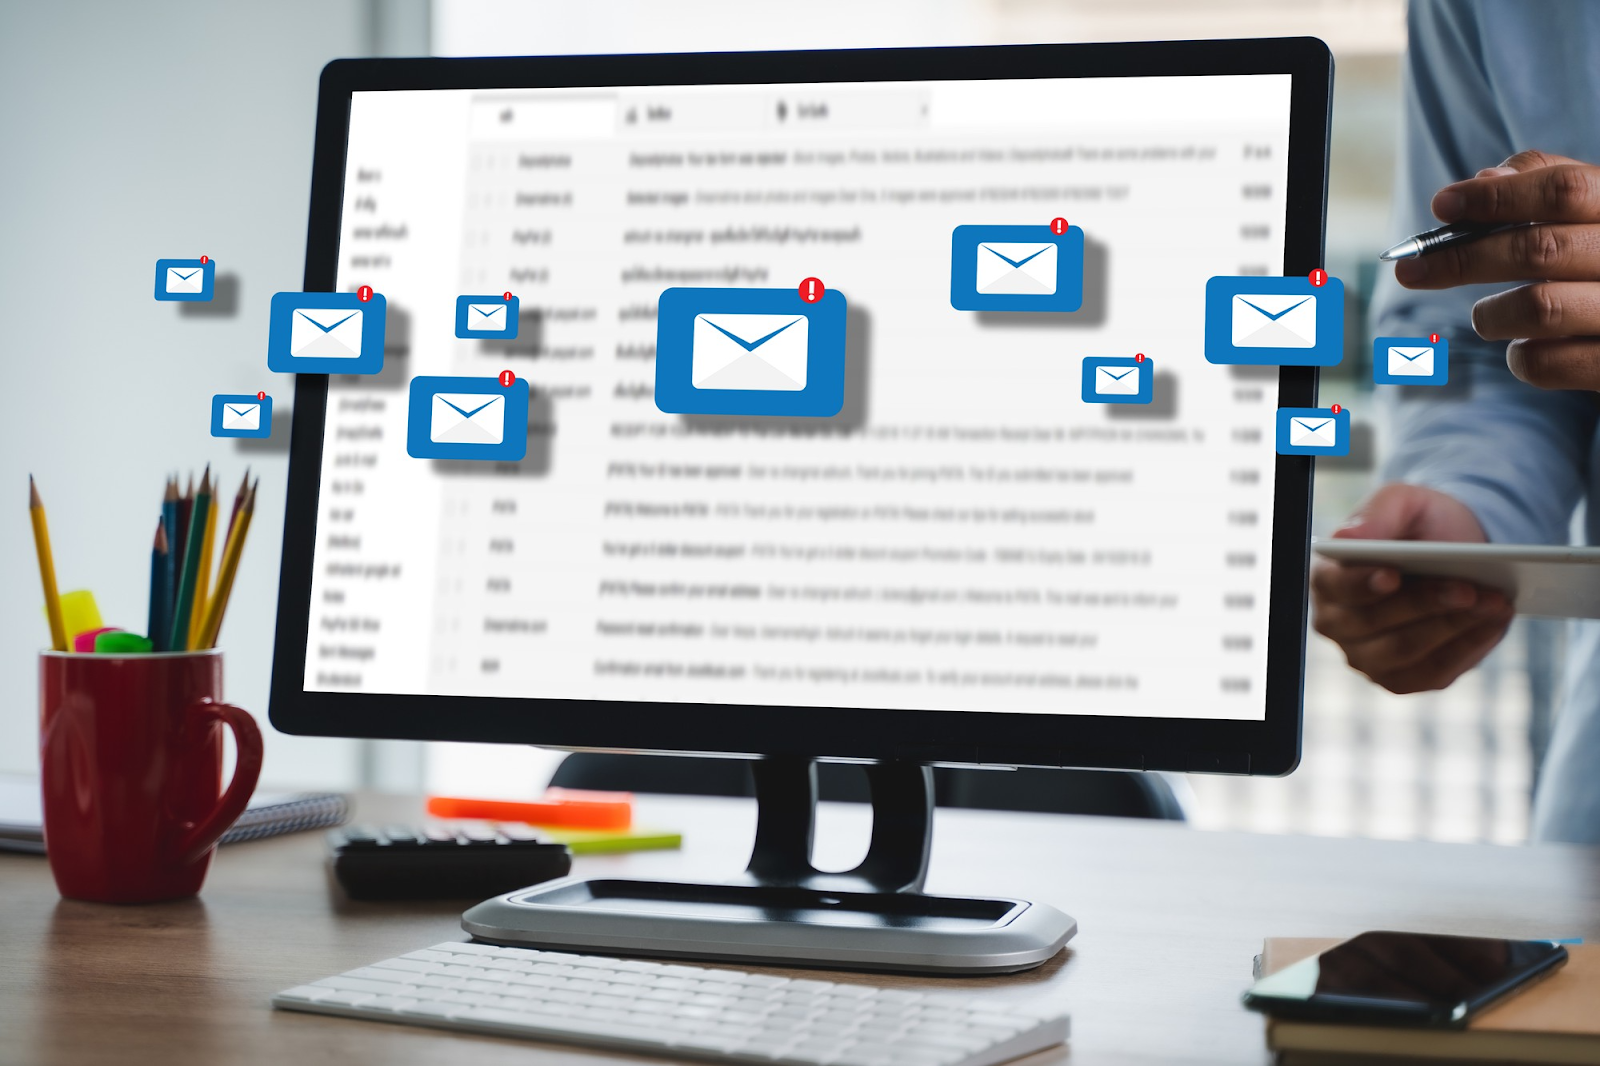 Emails shown on a desktop sitting on a table